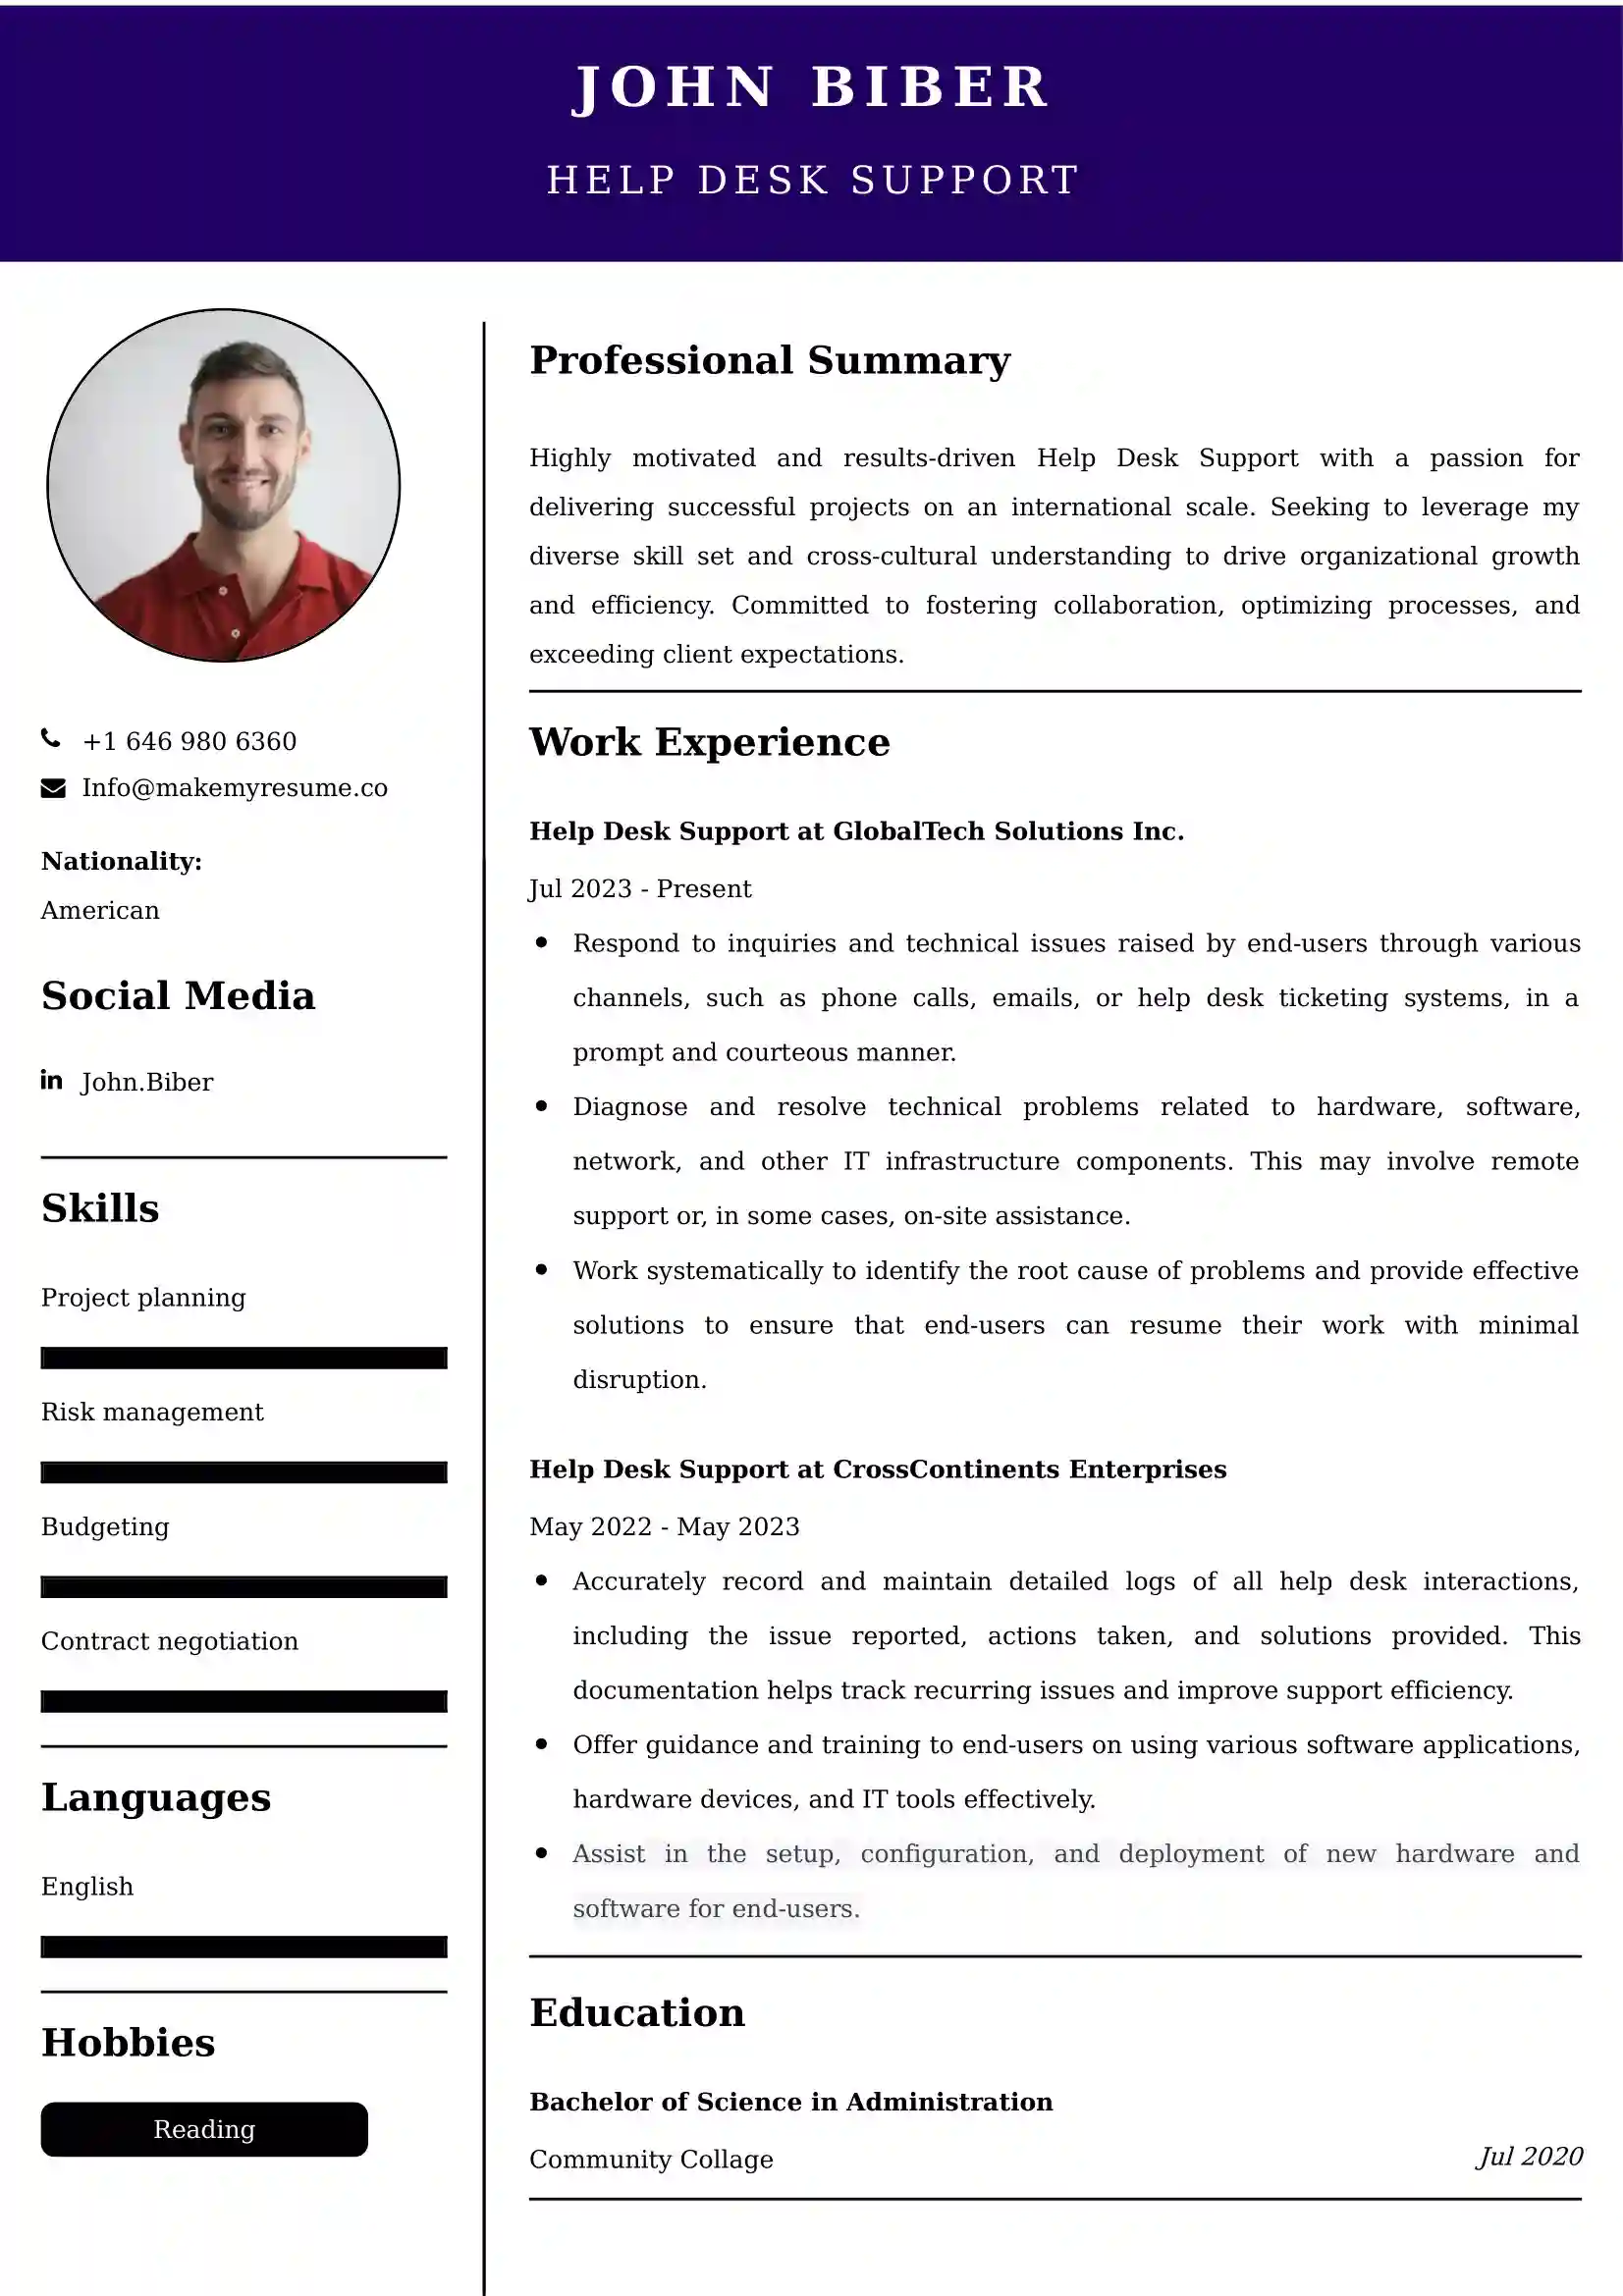 Help Desk Support Resume Examples - Brazilian Format, Latest Template